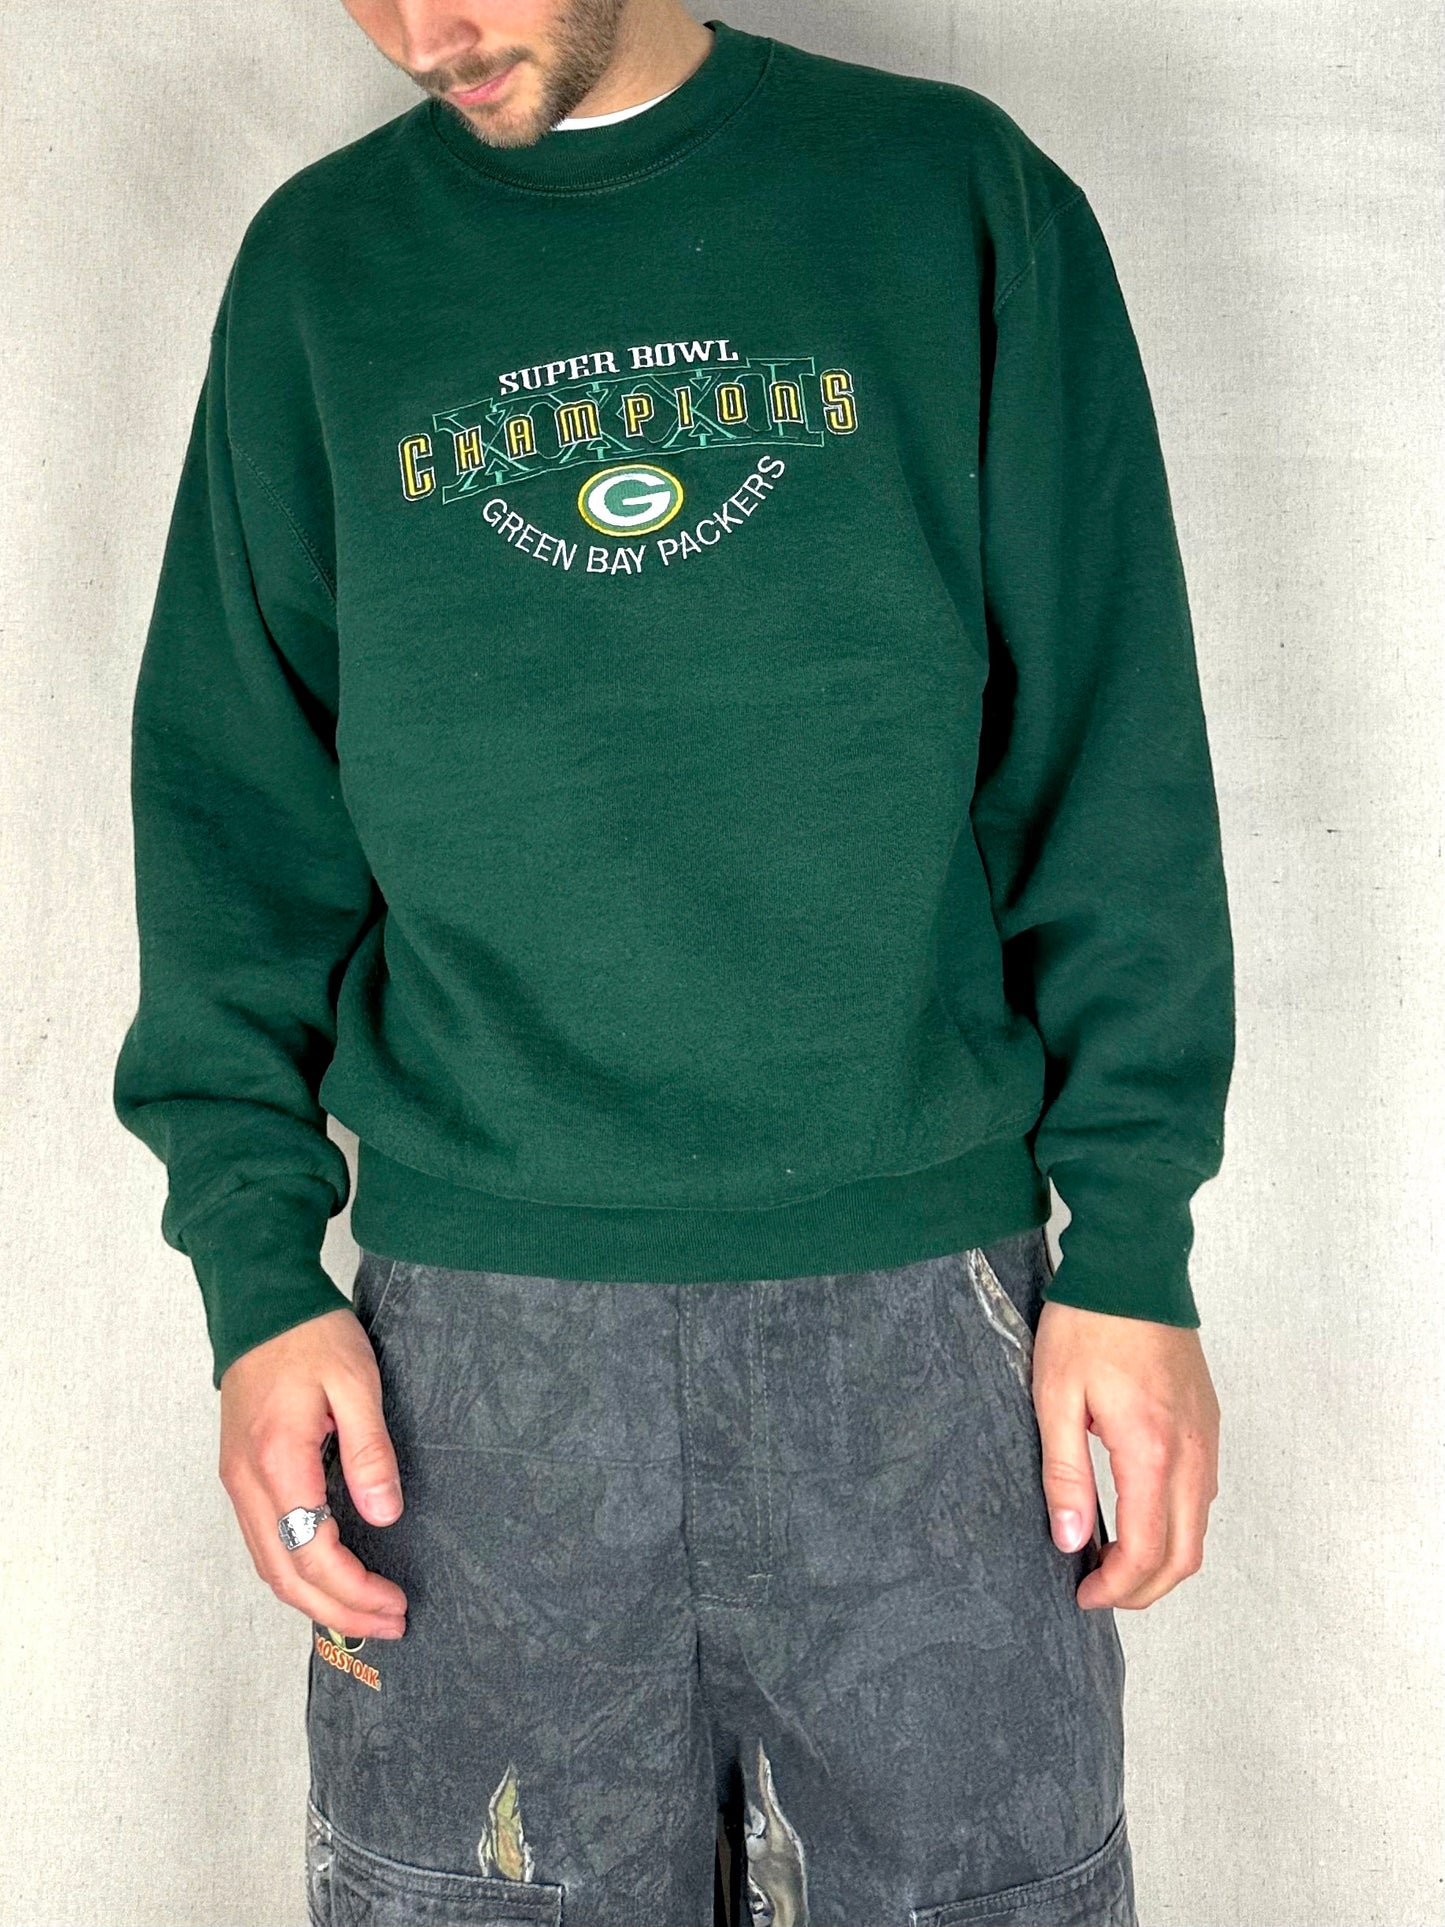 1997 Green Bay Packers NFL USA Made Embroidered Vintage Sweatshirt Size M-L